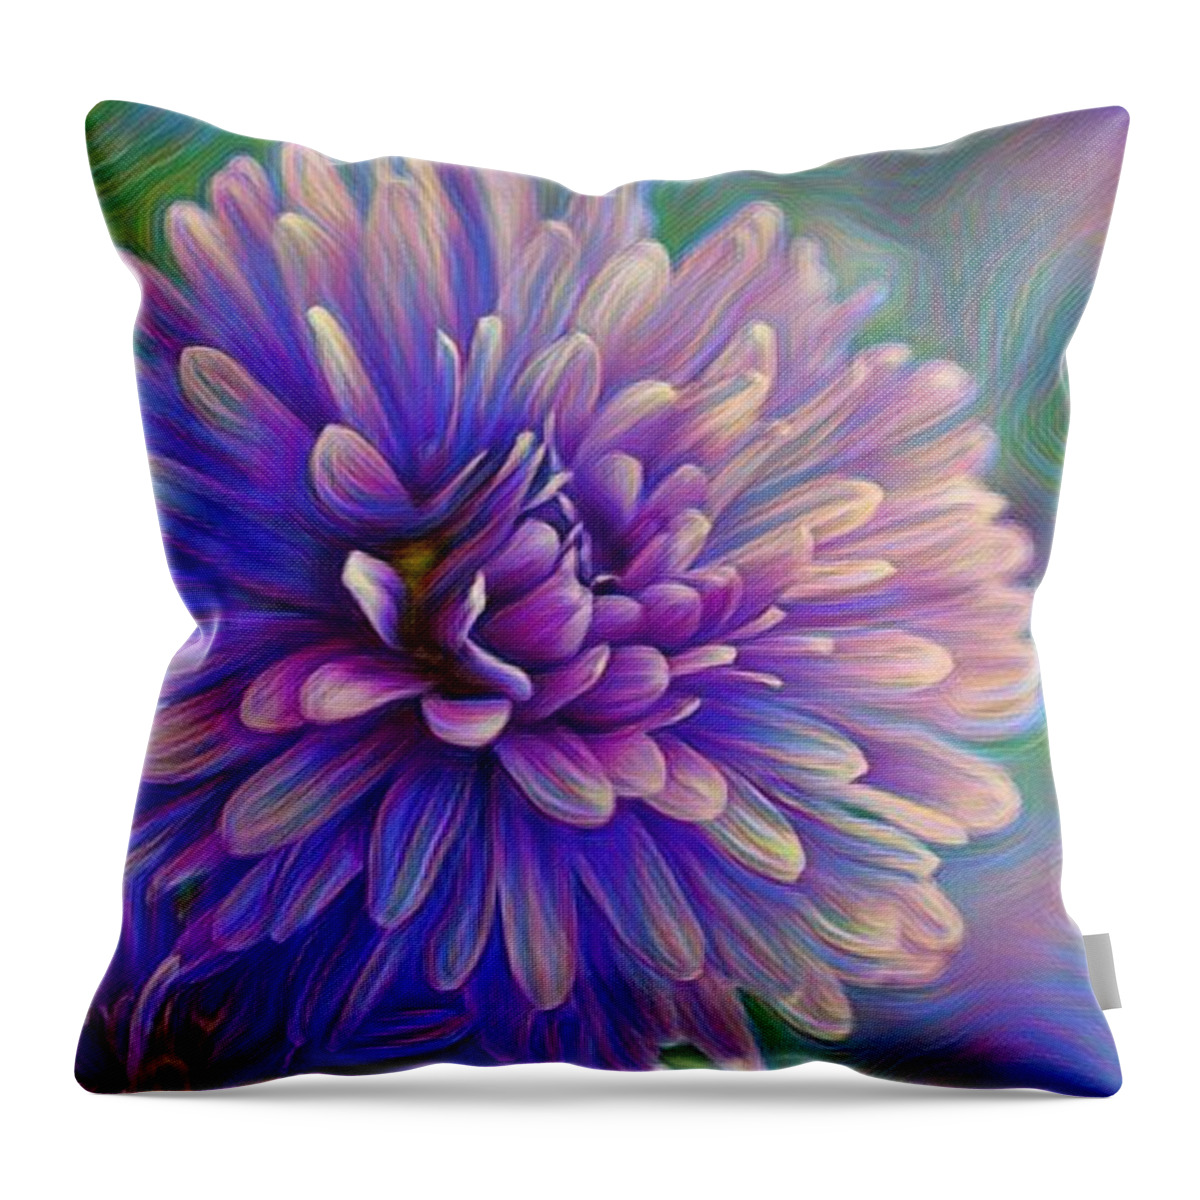 Lilac Throw Pillow featuring the painting Lilac Purple Perfection by Teresa Trotter